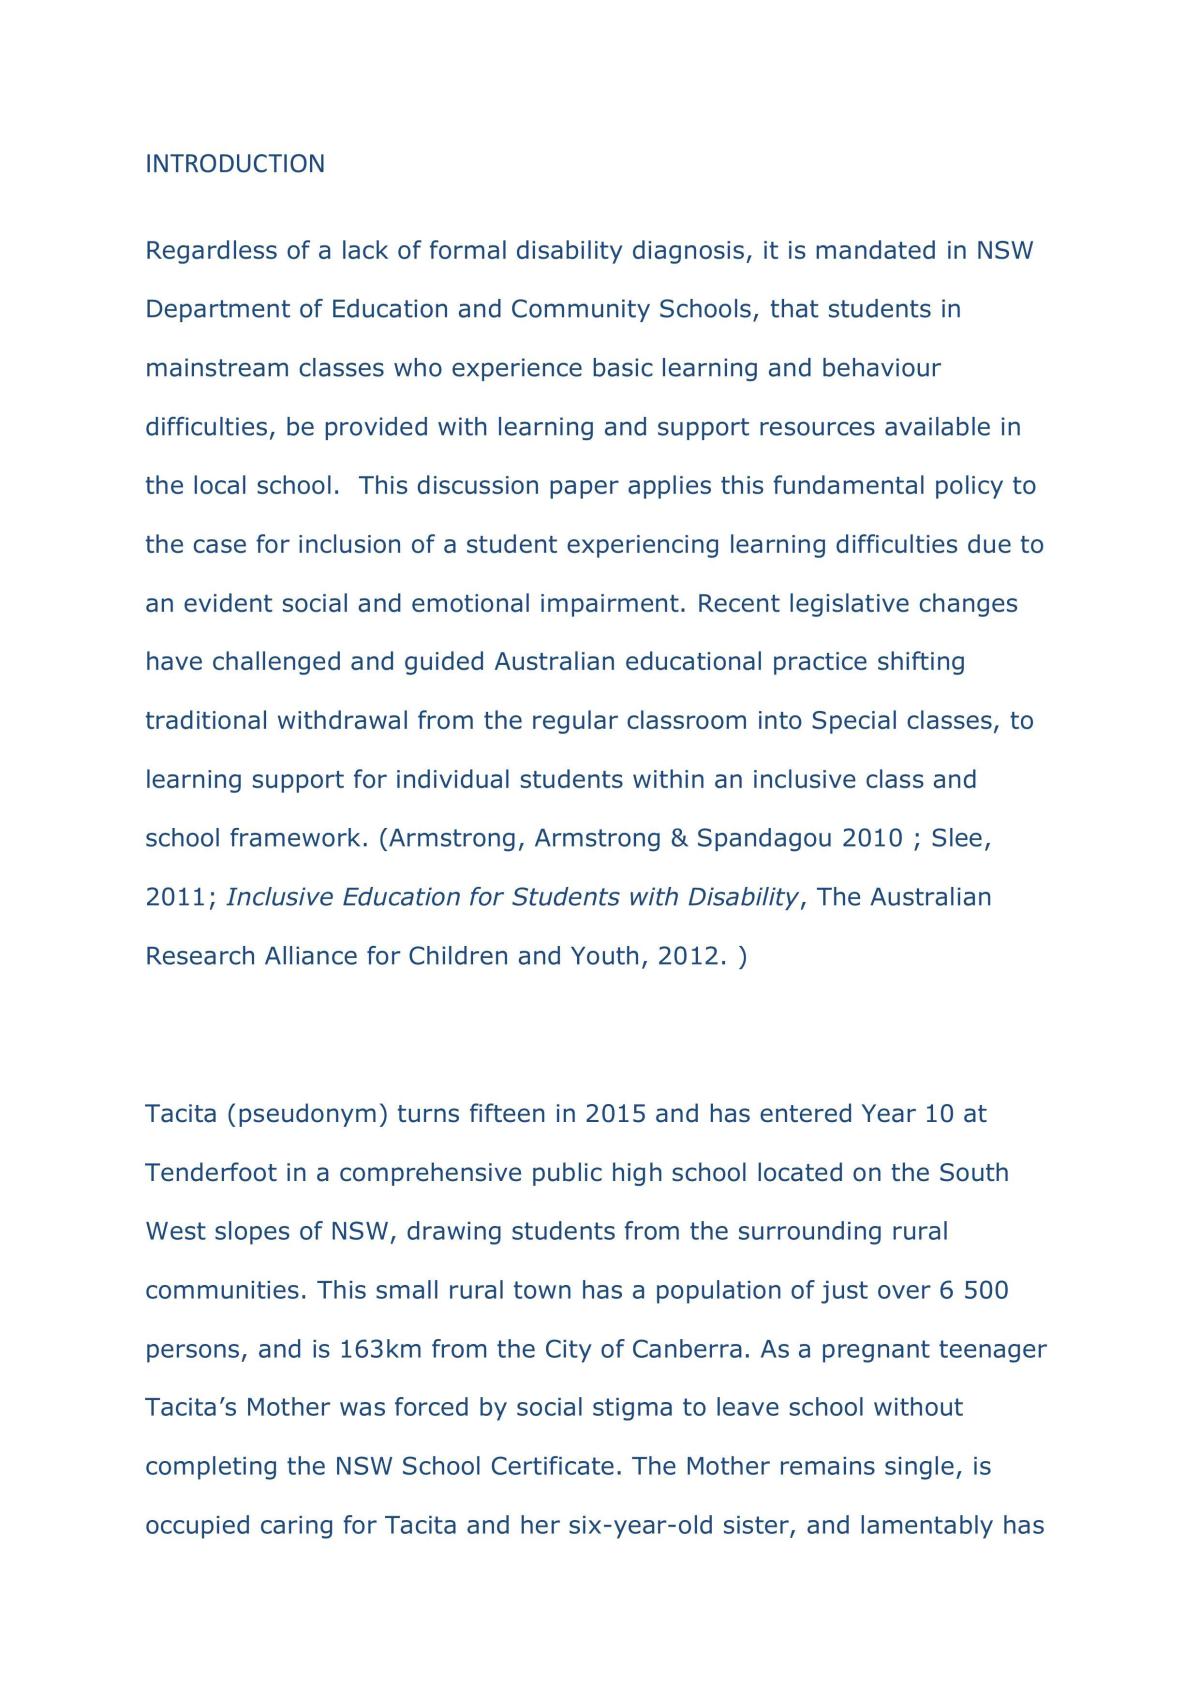 Assessment Task 1 Analysis of Policy Frameworks - Page 2